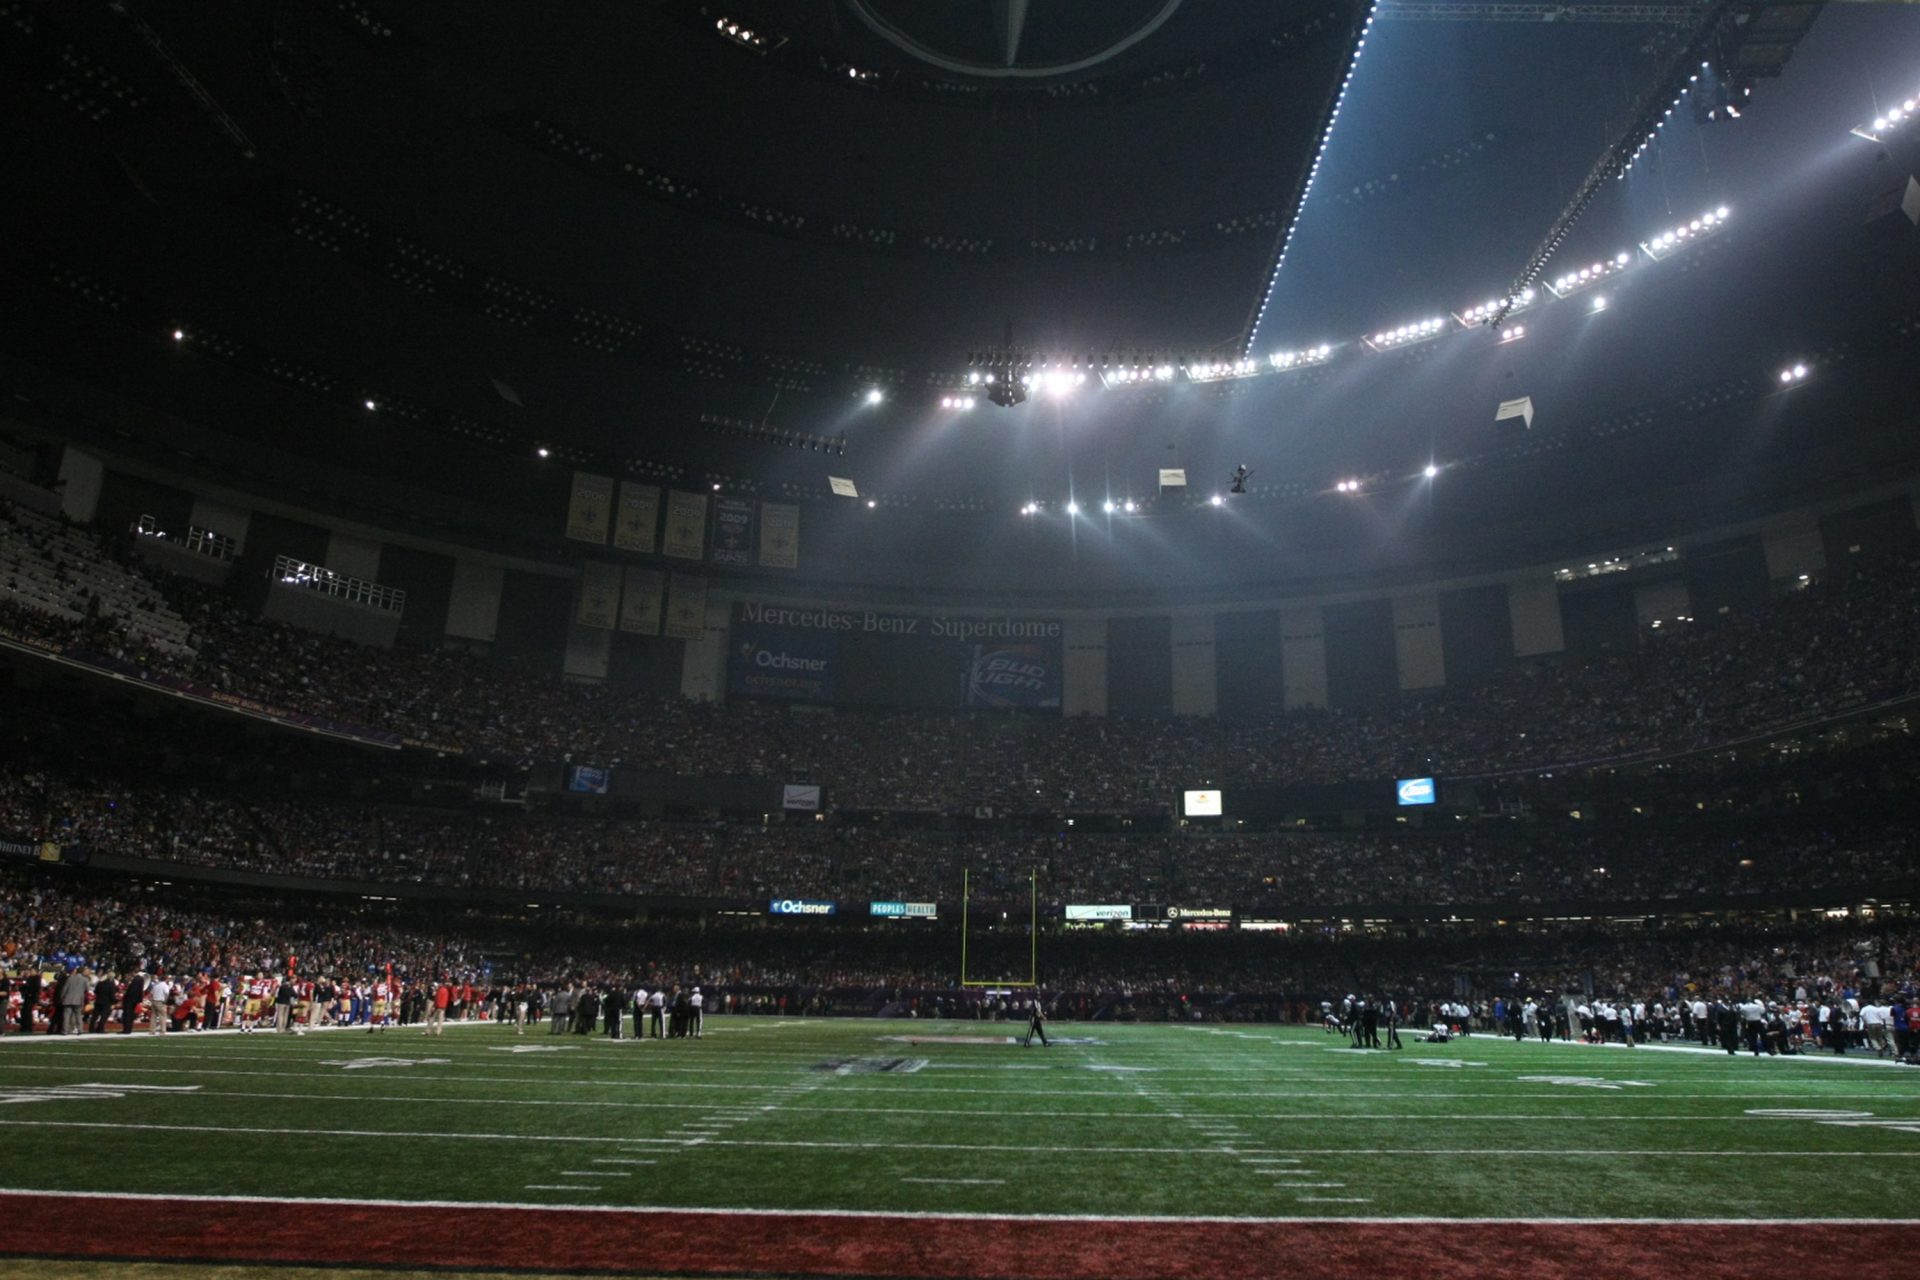 Super Bowl XLVII: Into The Darkness